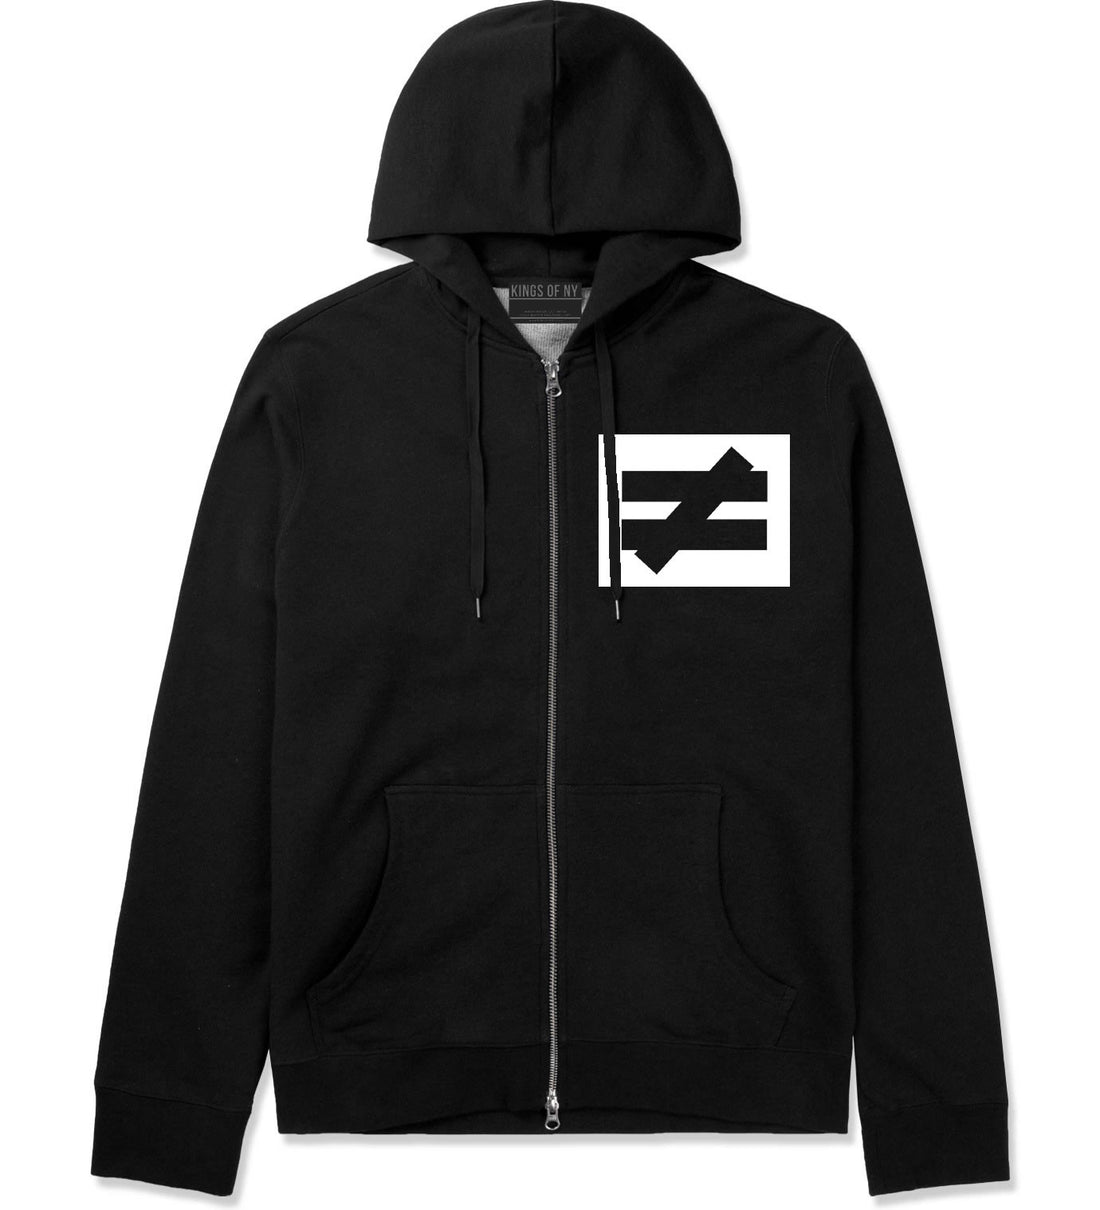 No Equal No Competition Zip Up Hoodie Hoody in Black by Kings Of NY